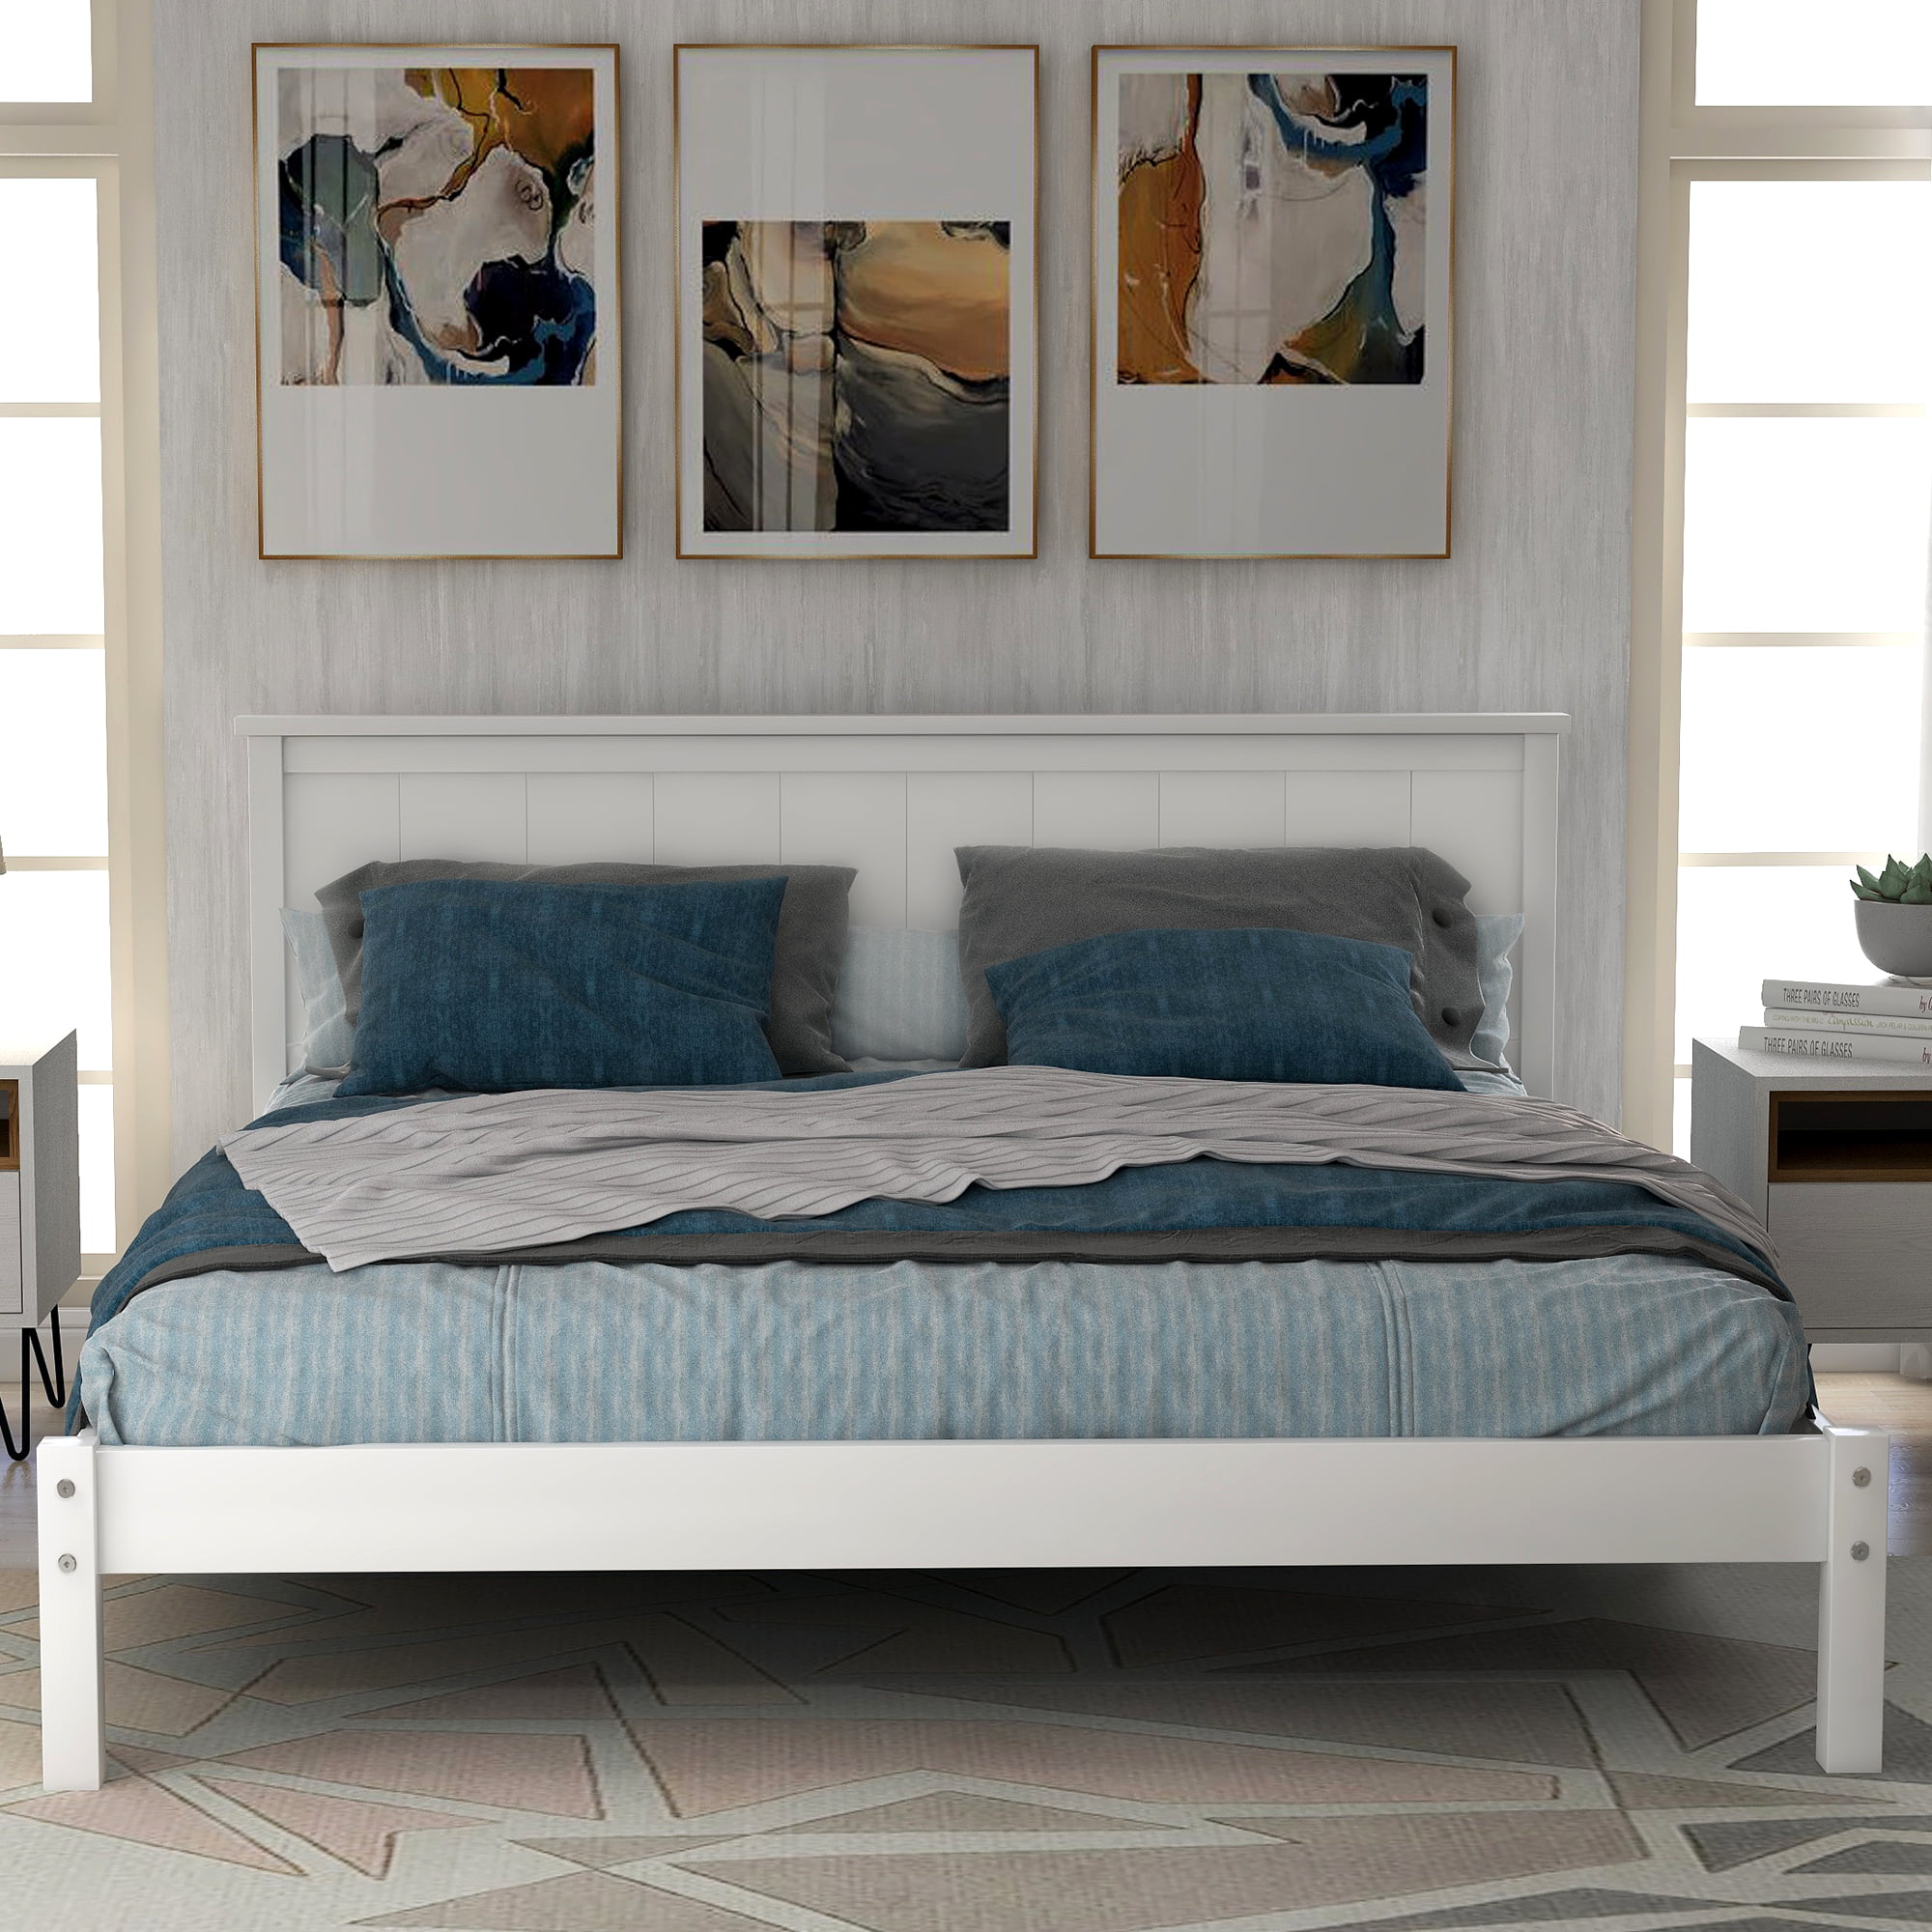 Queen Bed Frame with Headboard, Modern White Wood Platform Bed Frame